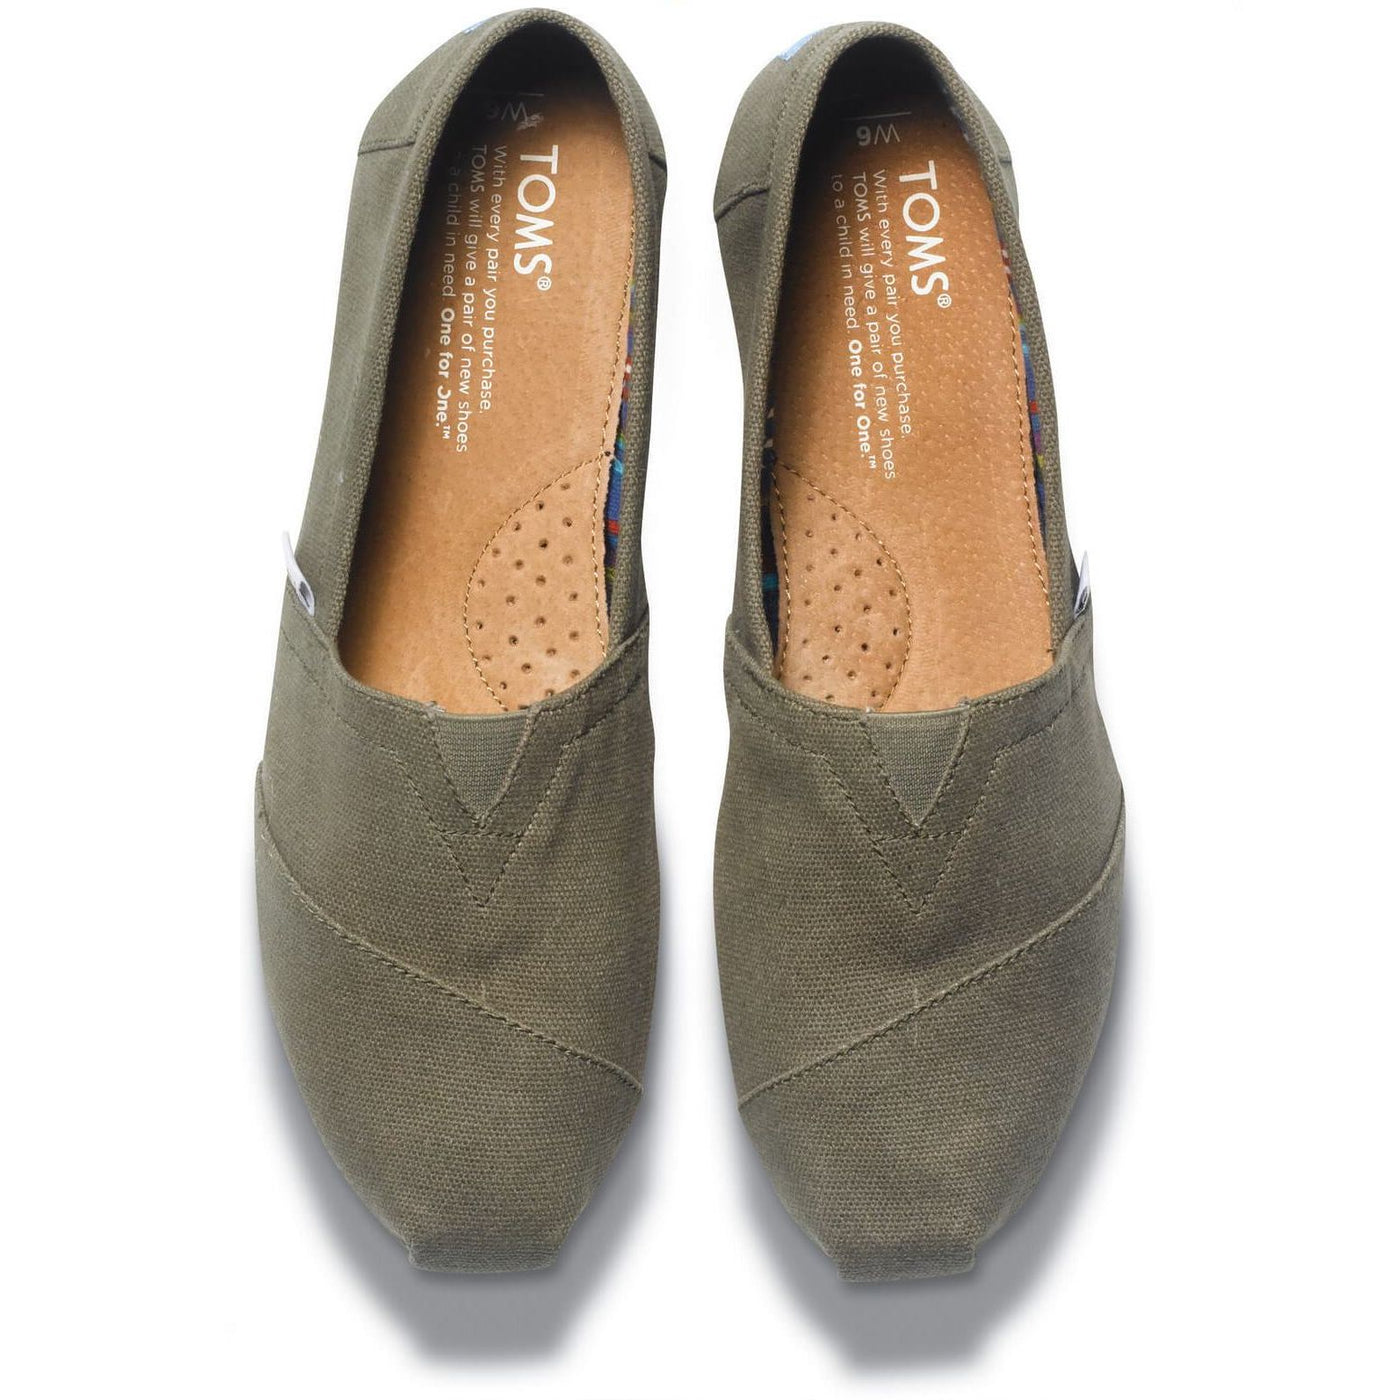 TOMS Women's Canvas Olive Slip On Shoes